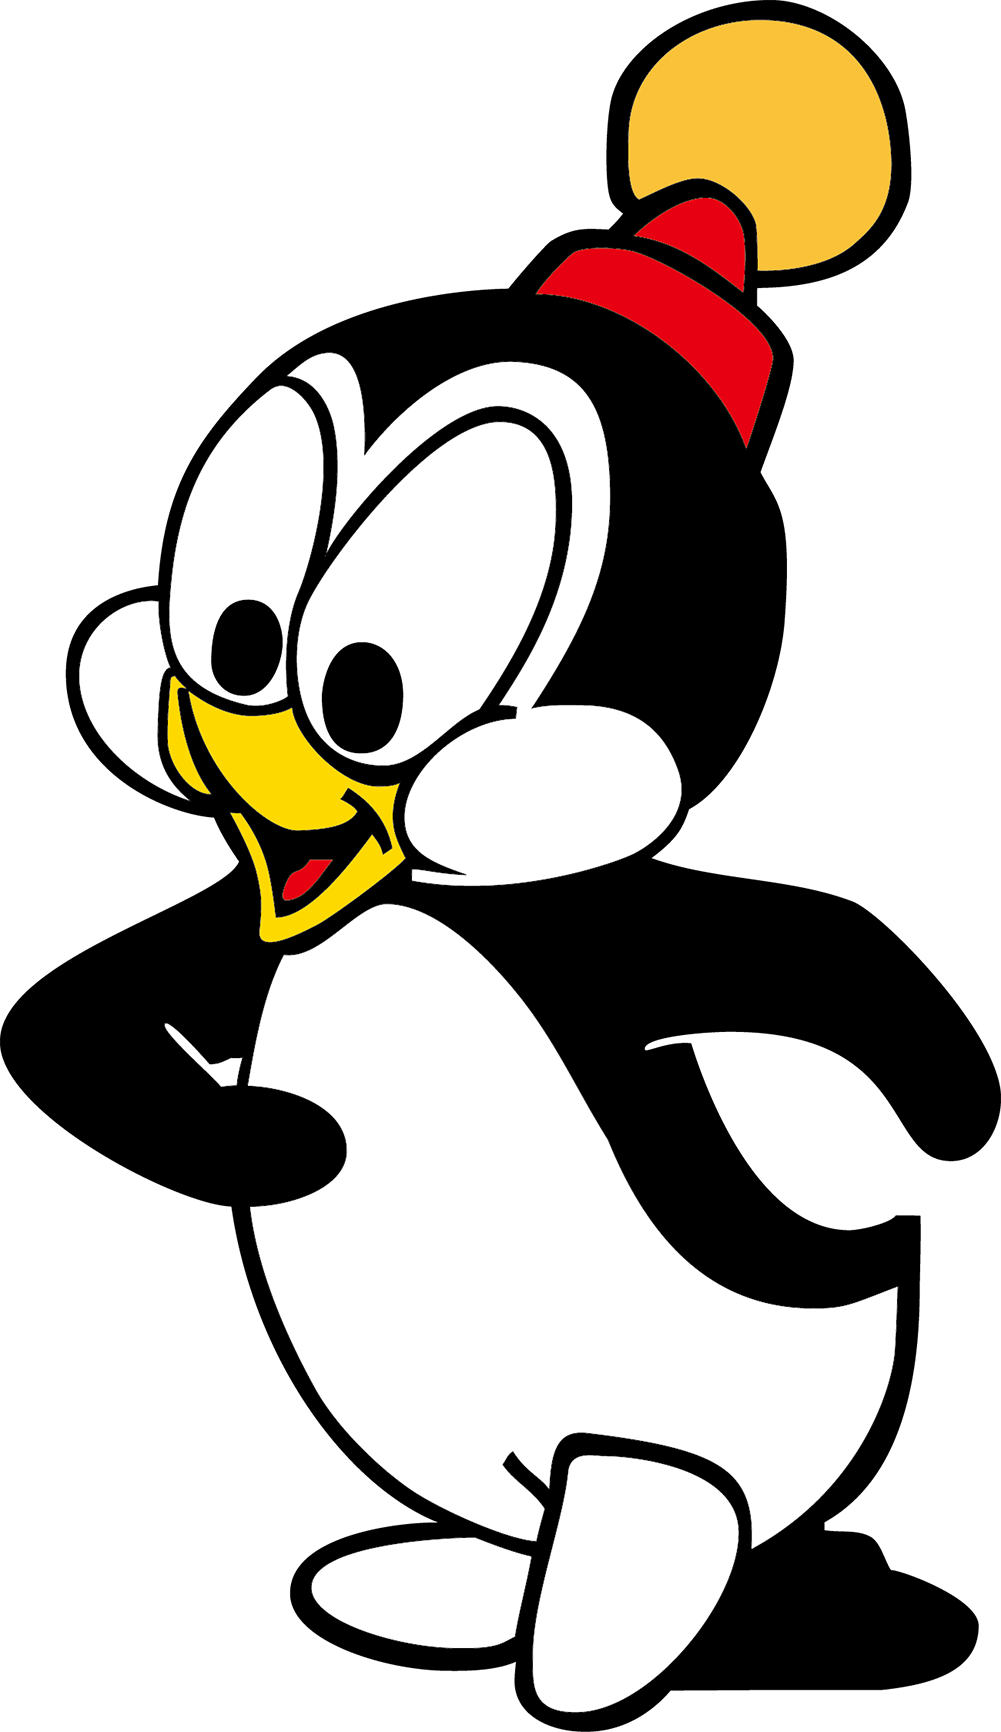 Chilly Willy Woody Woodpecker Penguin Logo Clip Art - Chilly Willy Png (1001x1732)